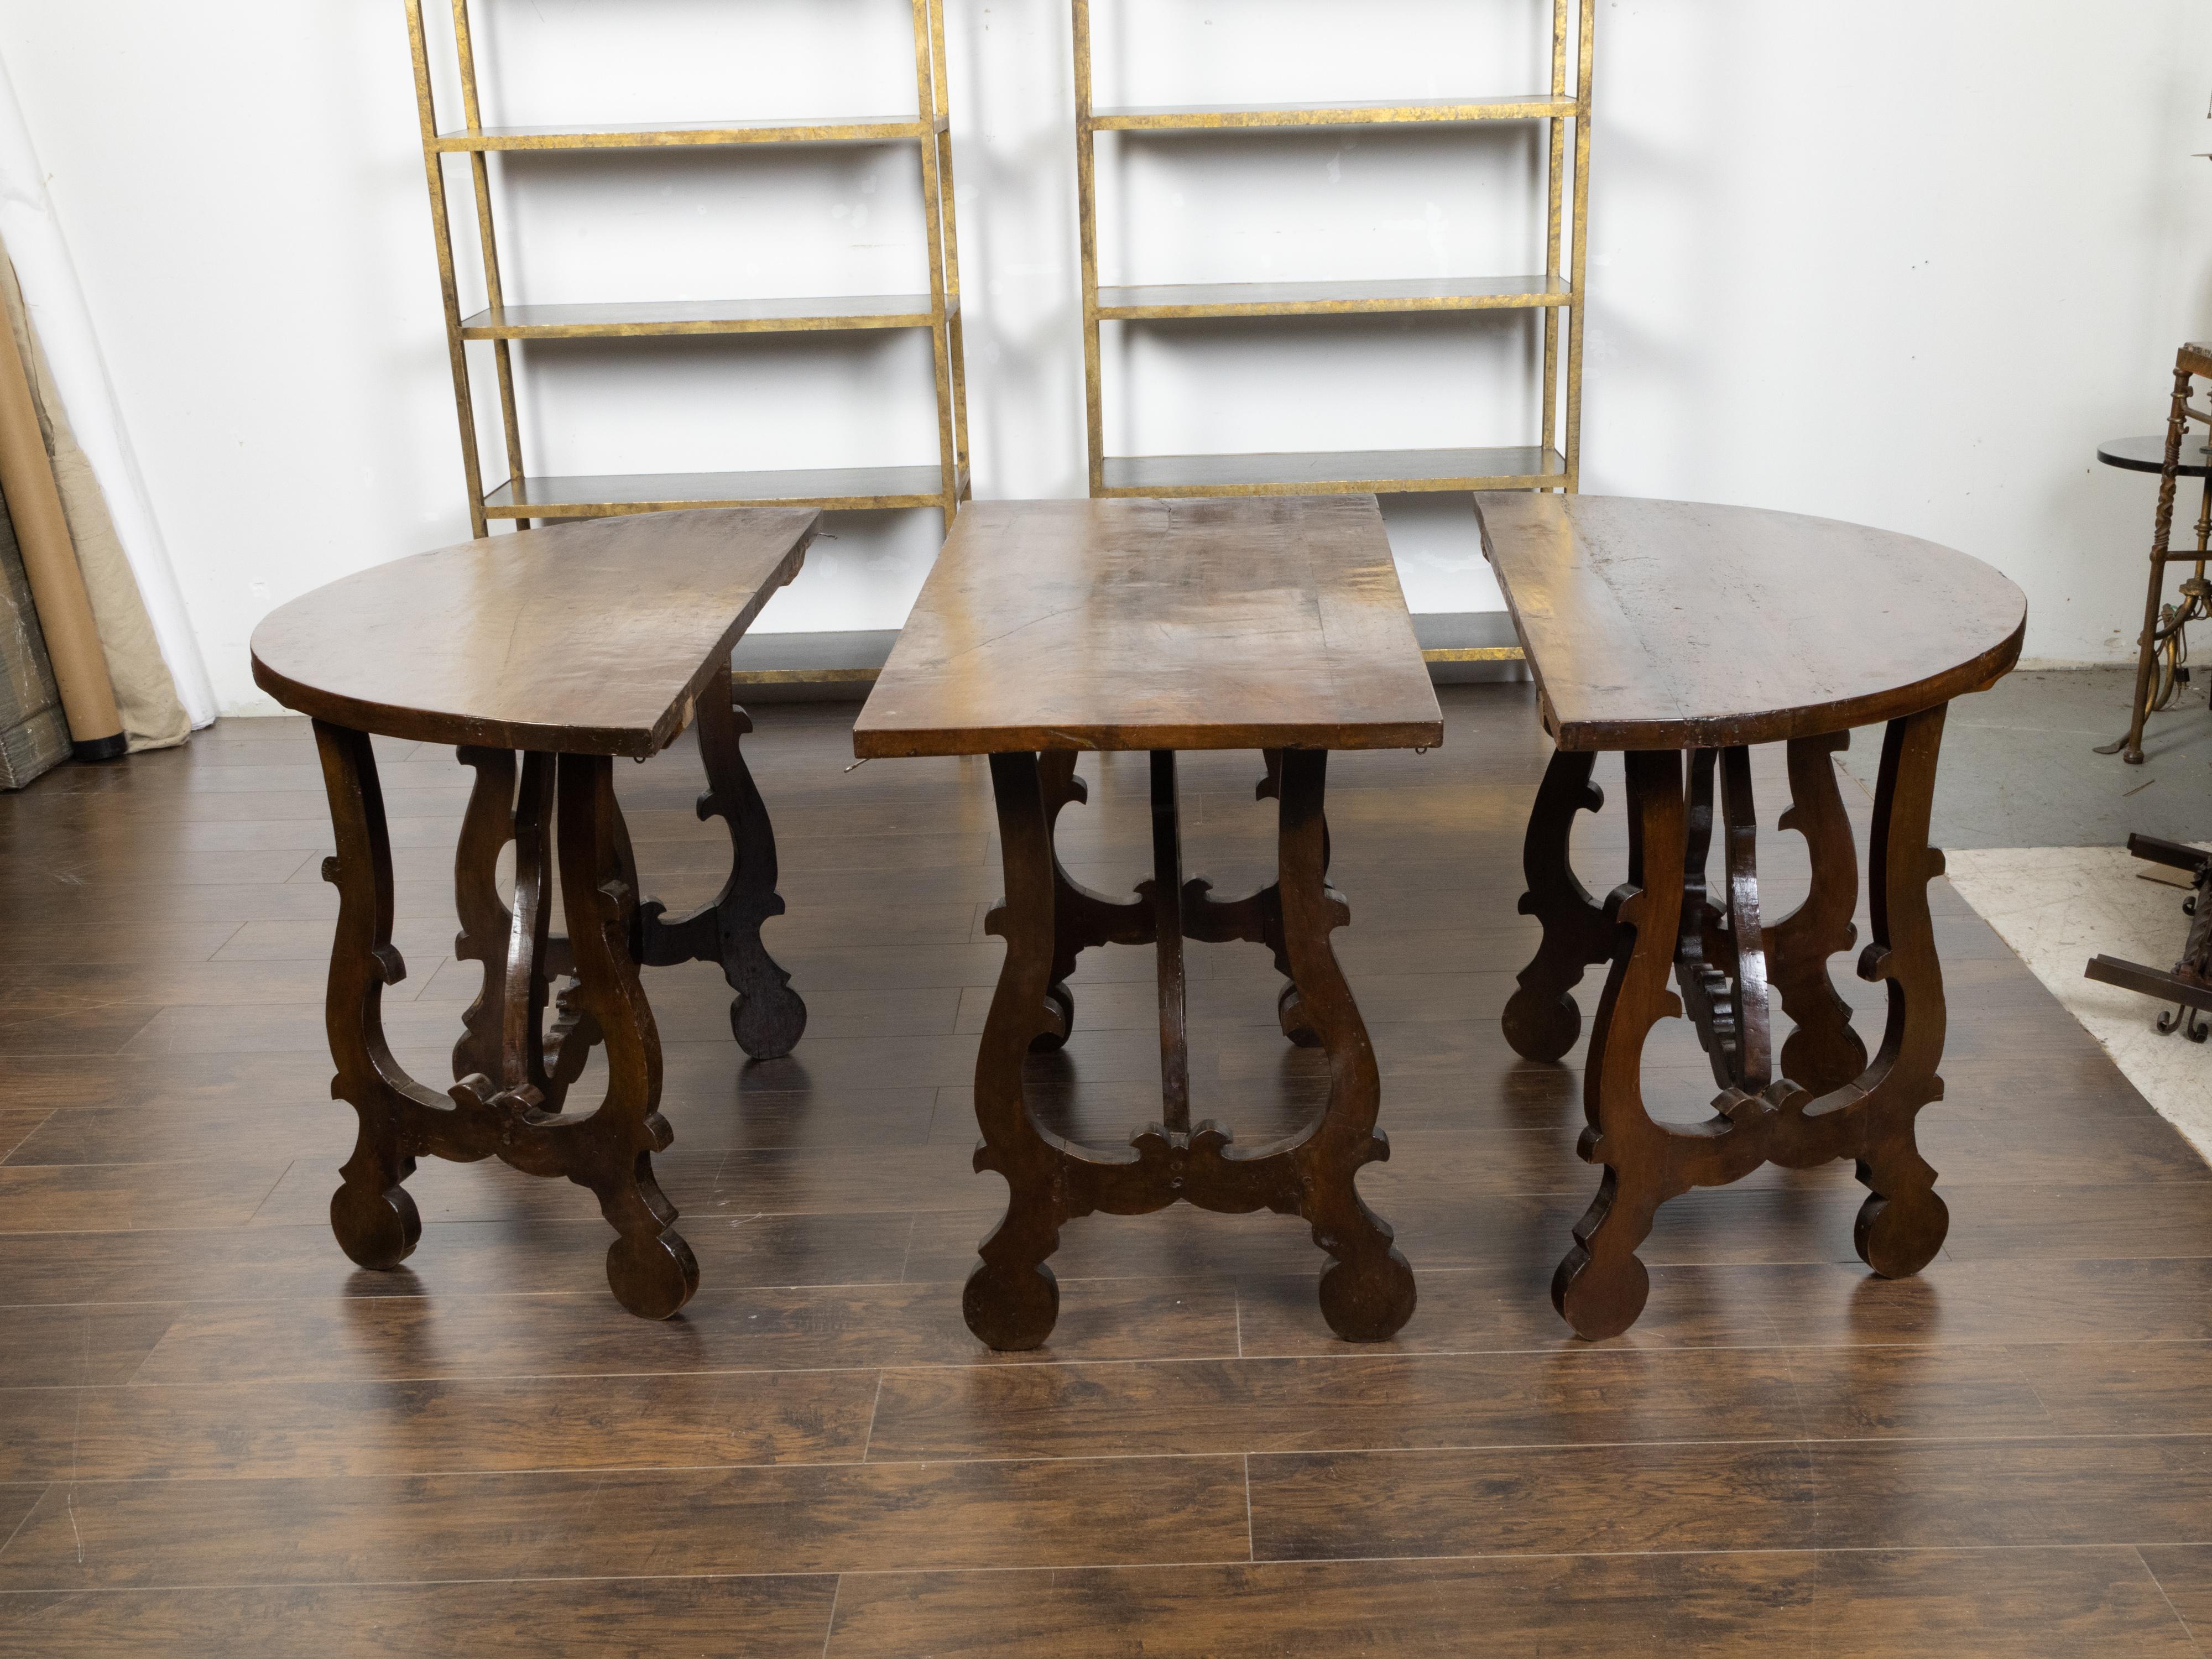 A three-piece Italian Baroque style oval top wooden table from the early 19th century, made of a side table, a pair of demilunes and lyre-shaped legs. Created in Italy during the first quarter of the 19th century, this Italian Baroque style table